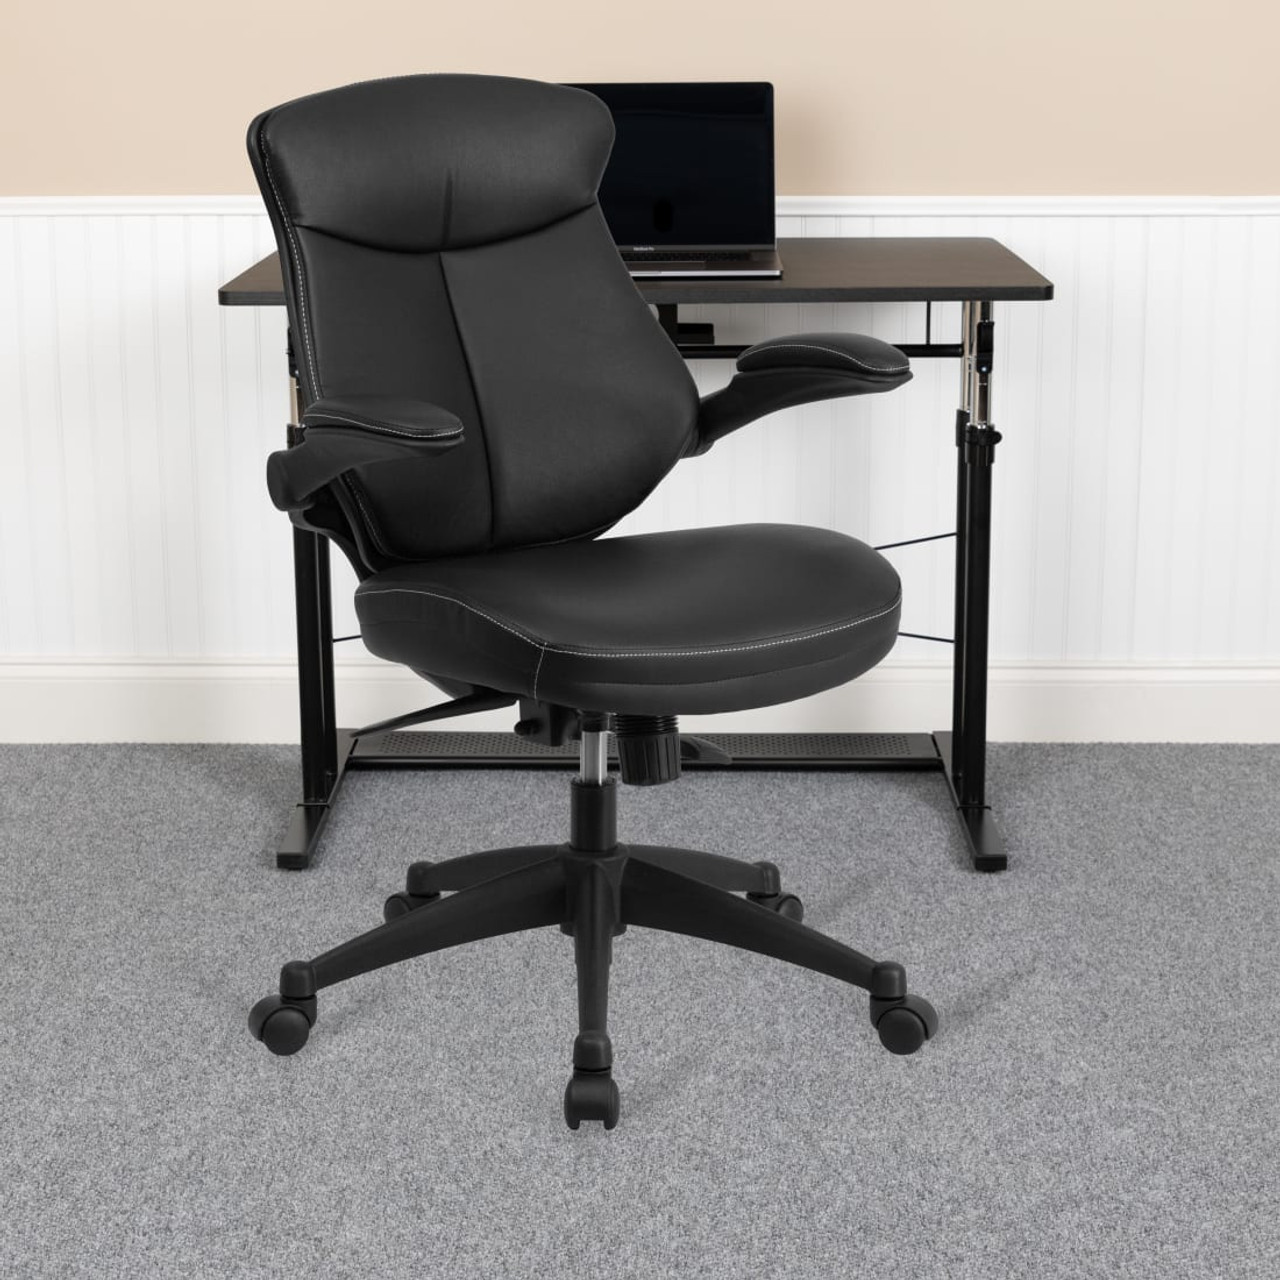 Mid-Back Black LeatherSoft Executive Swivel Ergonomic Office Chair with Back Angle Adjustment and Flip-Up Arms - BLZP804GG